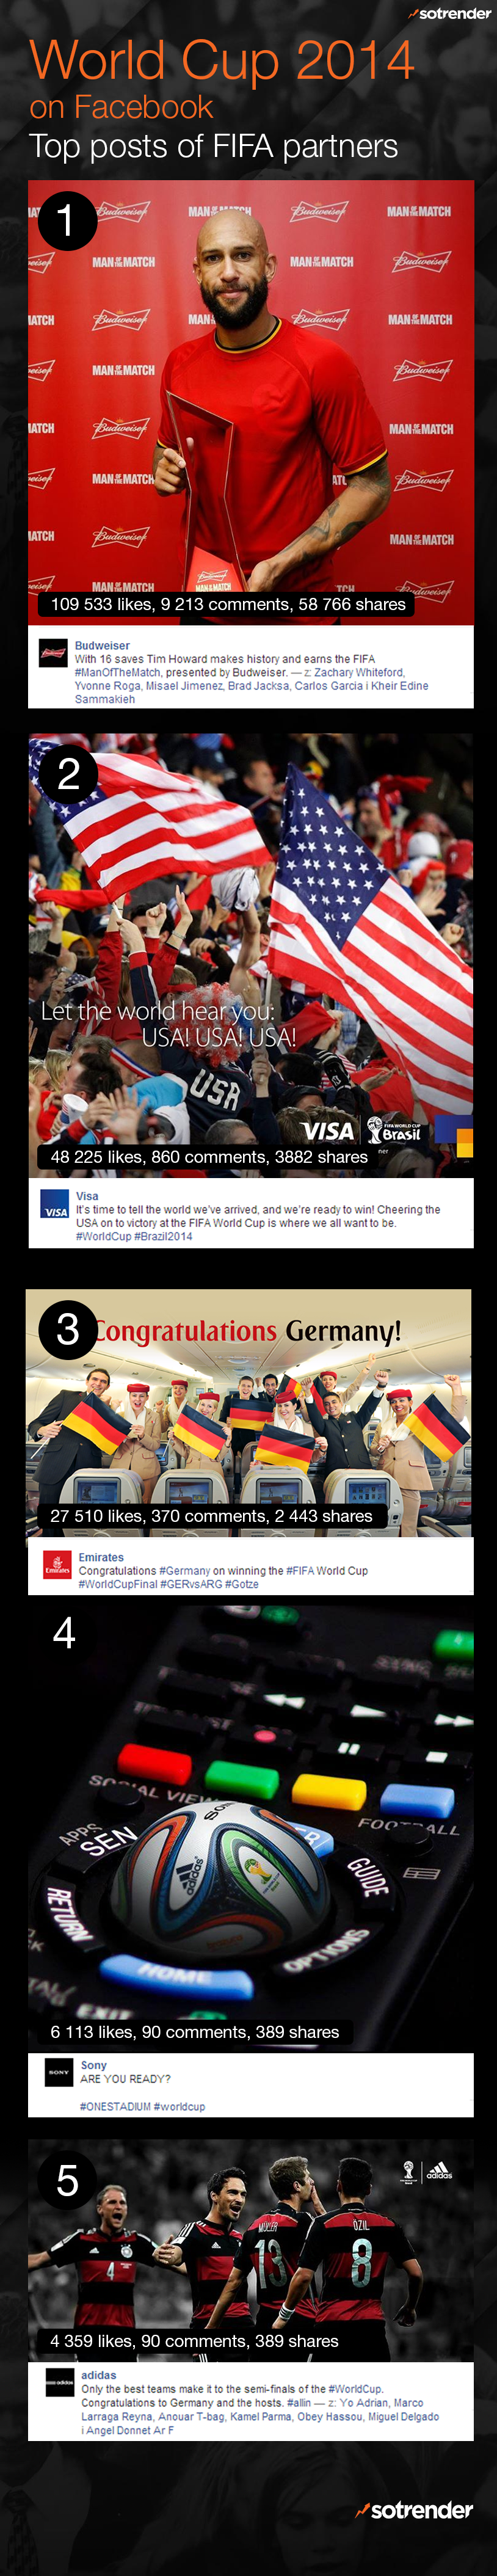 FIFA World Cup 2014 on Facebook. Top posts of FIFA partners